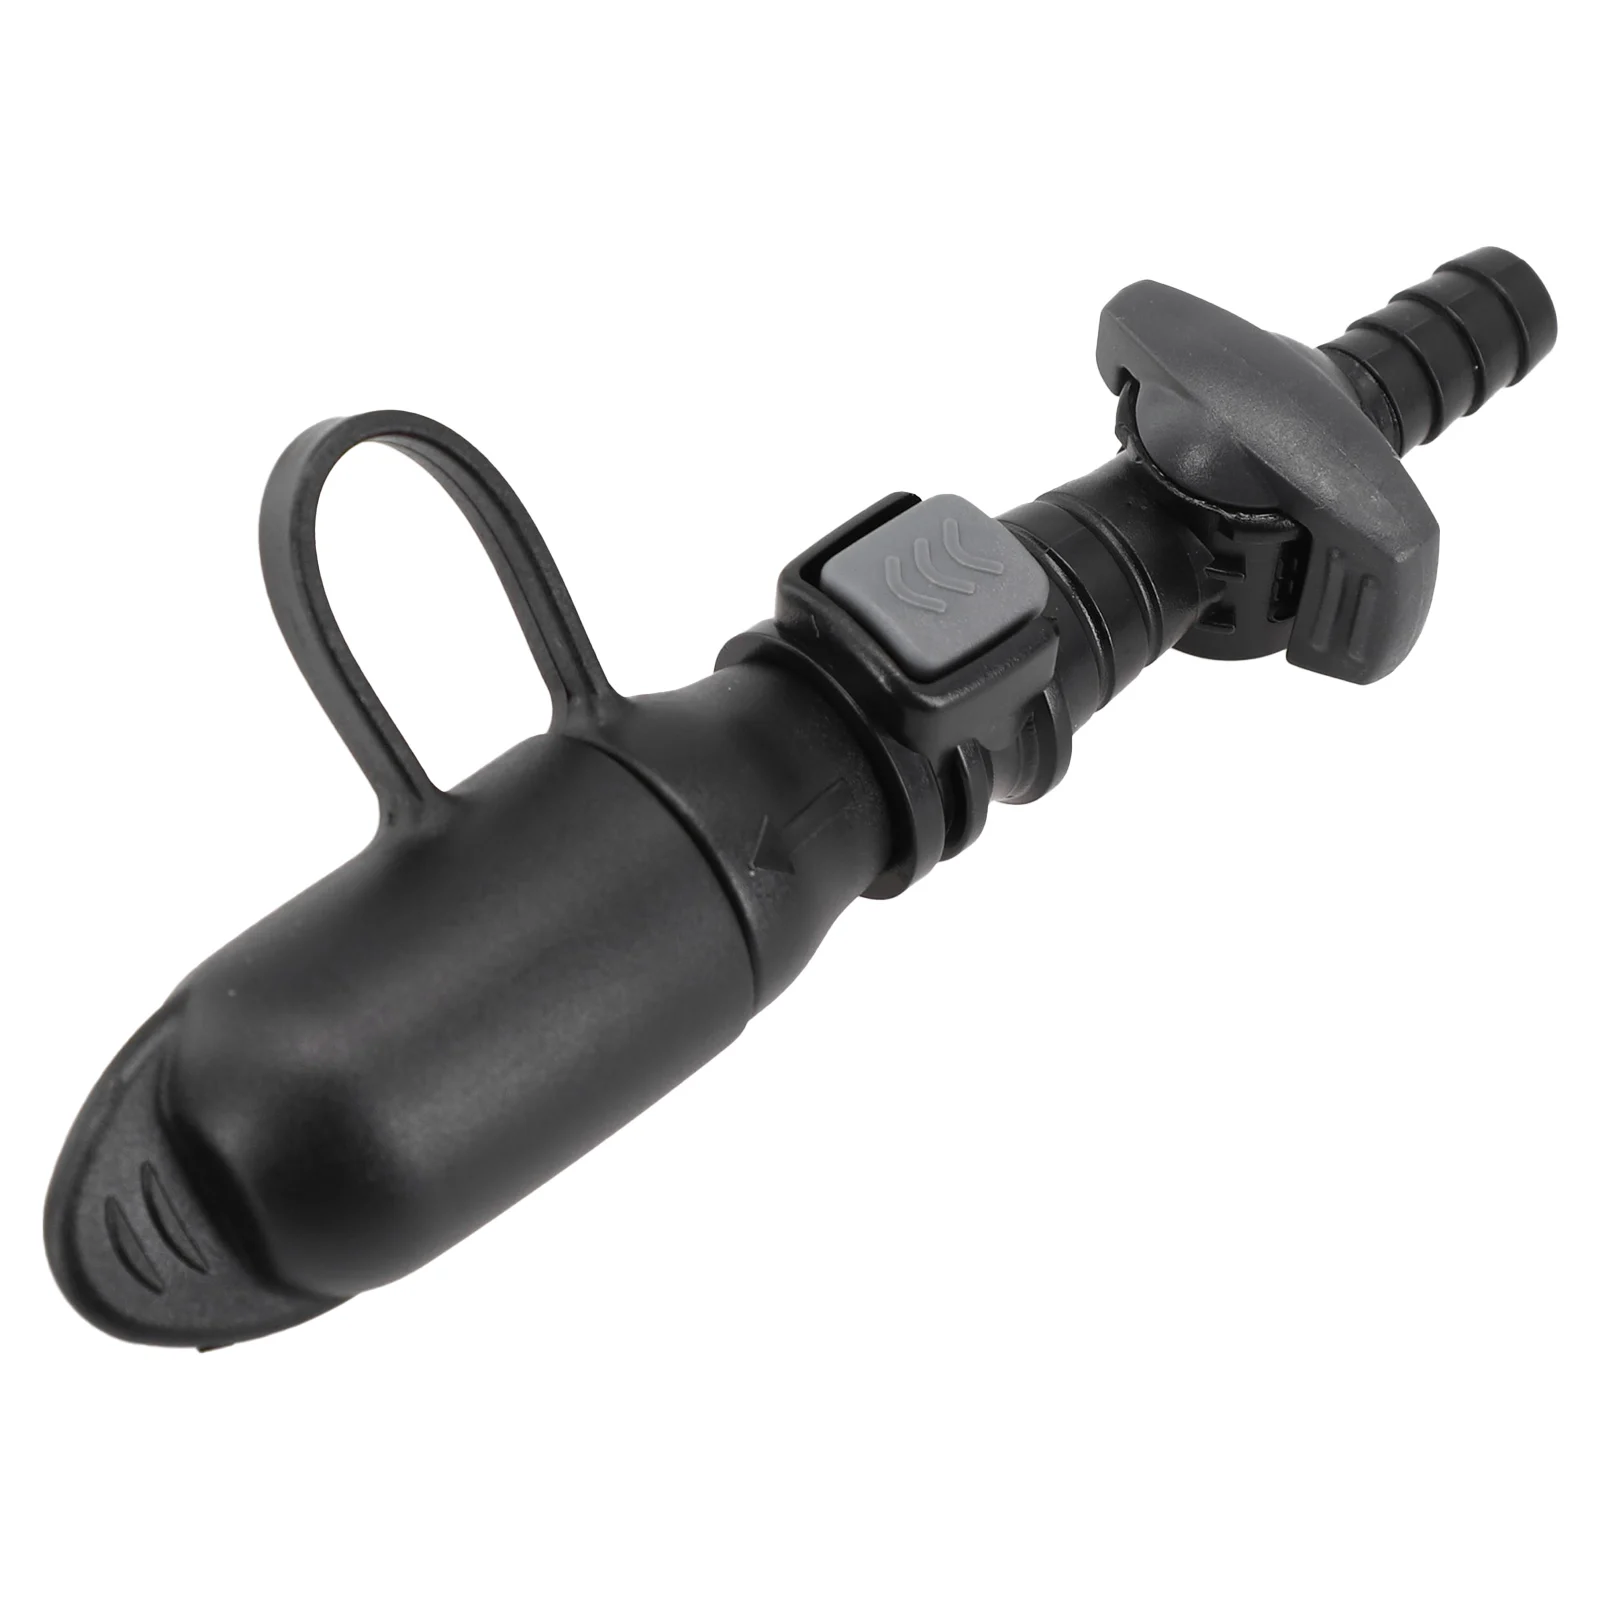 

High Quality Best Bite Valves With Cover Mouthpiece Nozzle Release With Cover Bag Bite Black Bladder Hydration